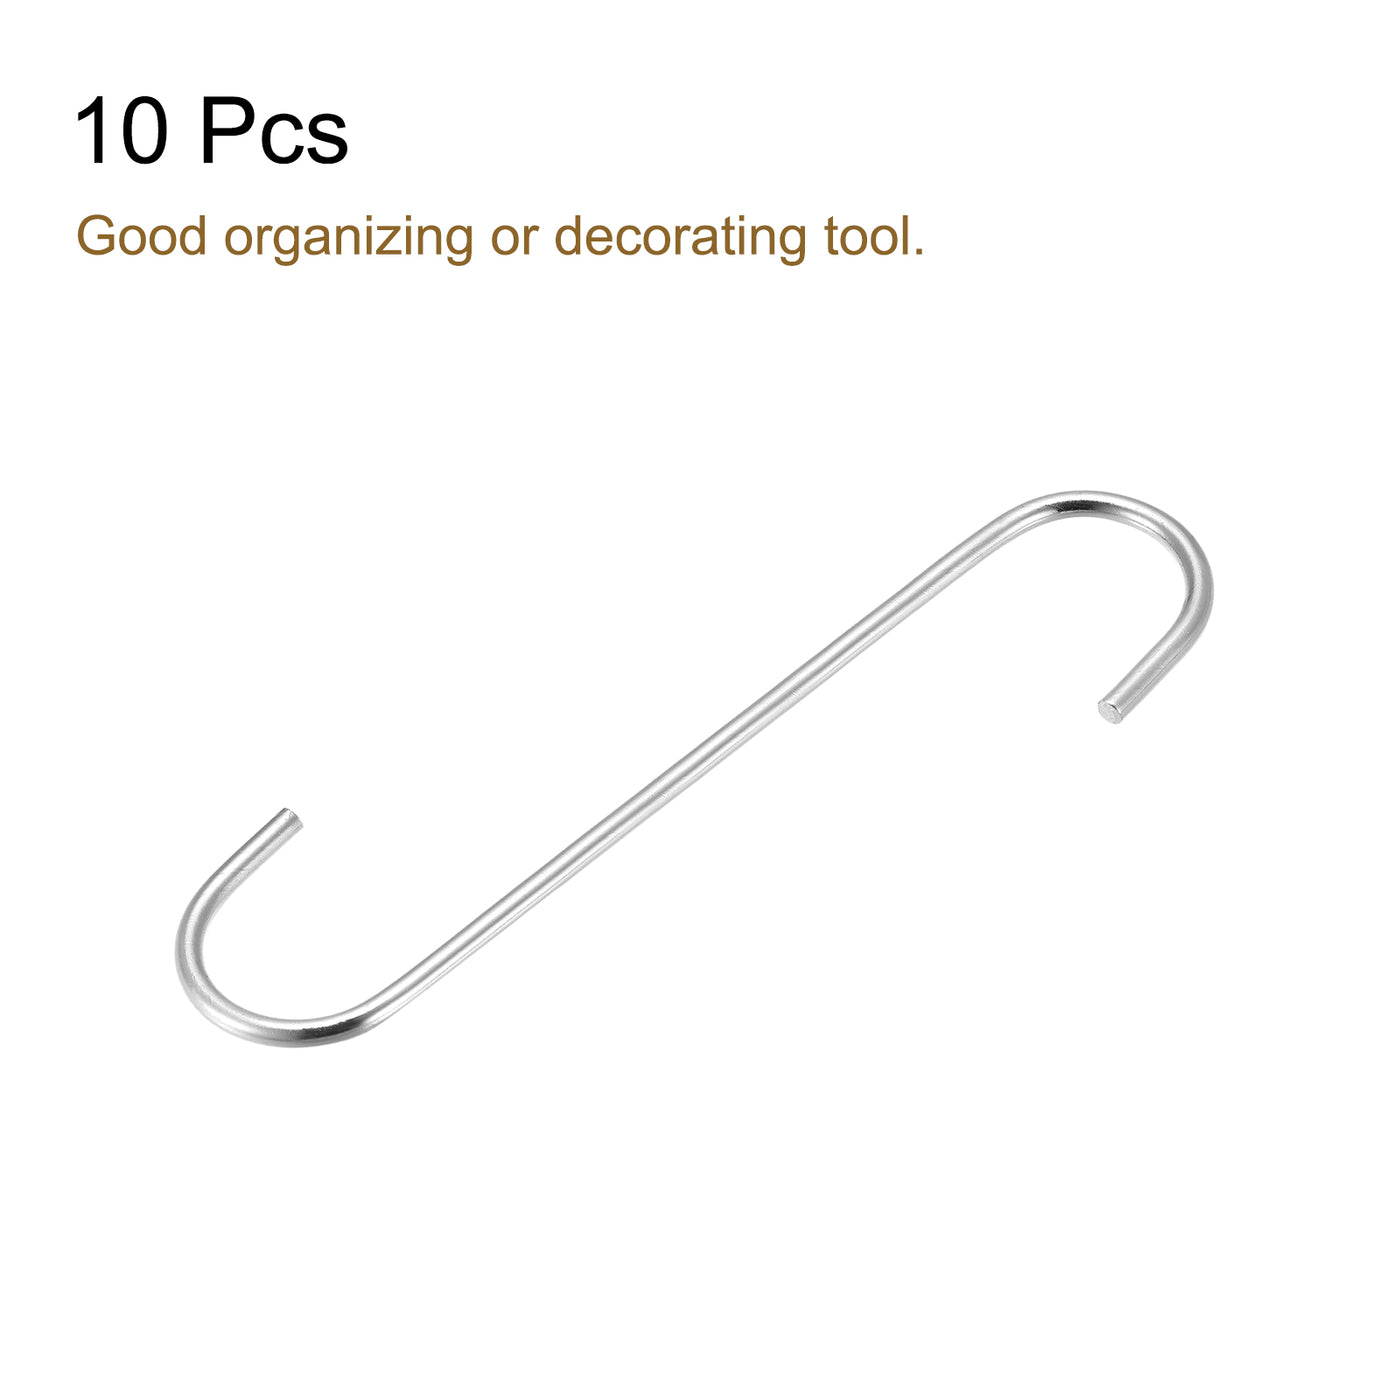 uxcell Uxcell S Hanging Hooks, 8inch/200mm Extra Long Steel Hanger, Indoor Outdoor Uses for Garden, Bathroom, Closet, Workshop, Kitchen, Silver Tone, 10Pcs